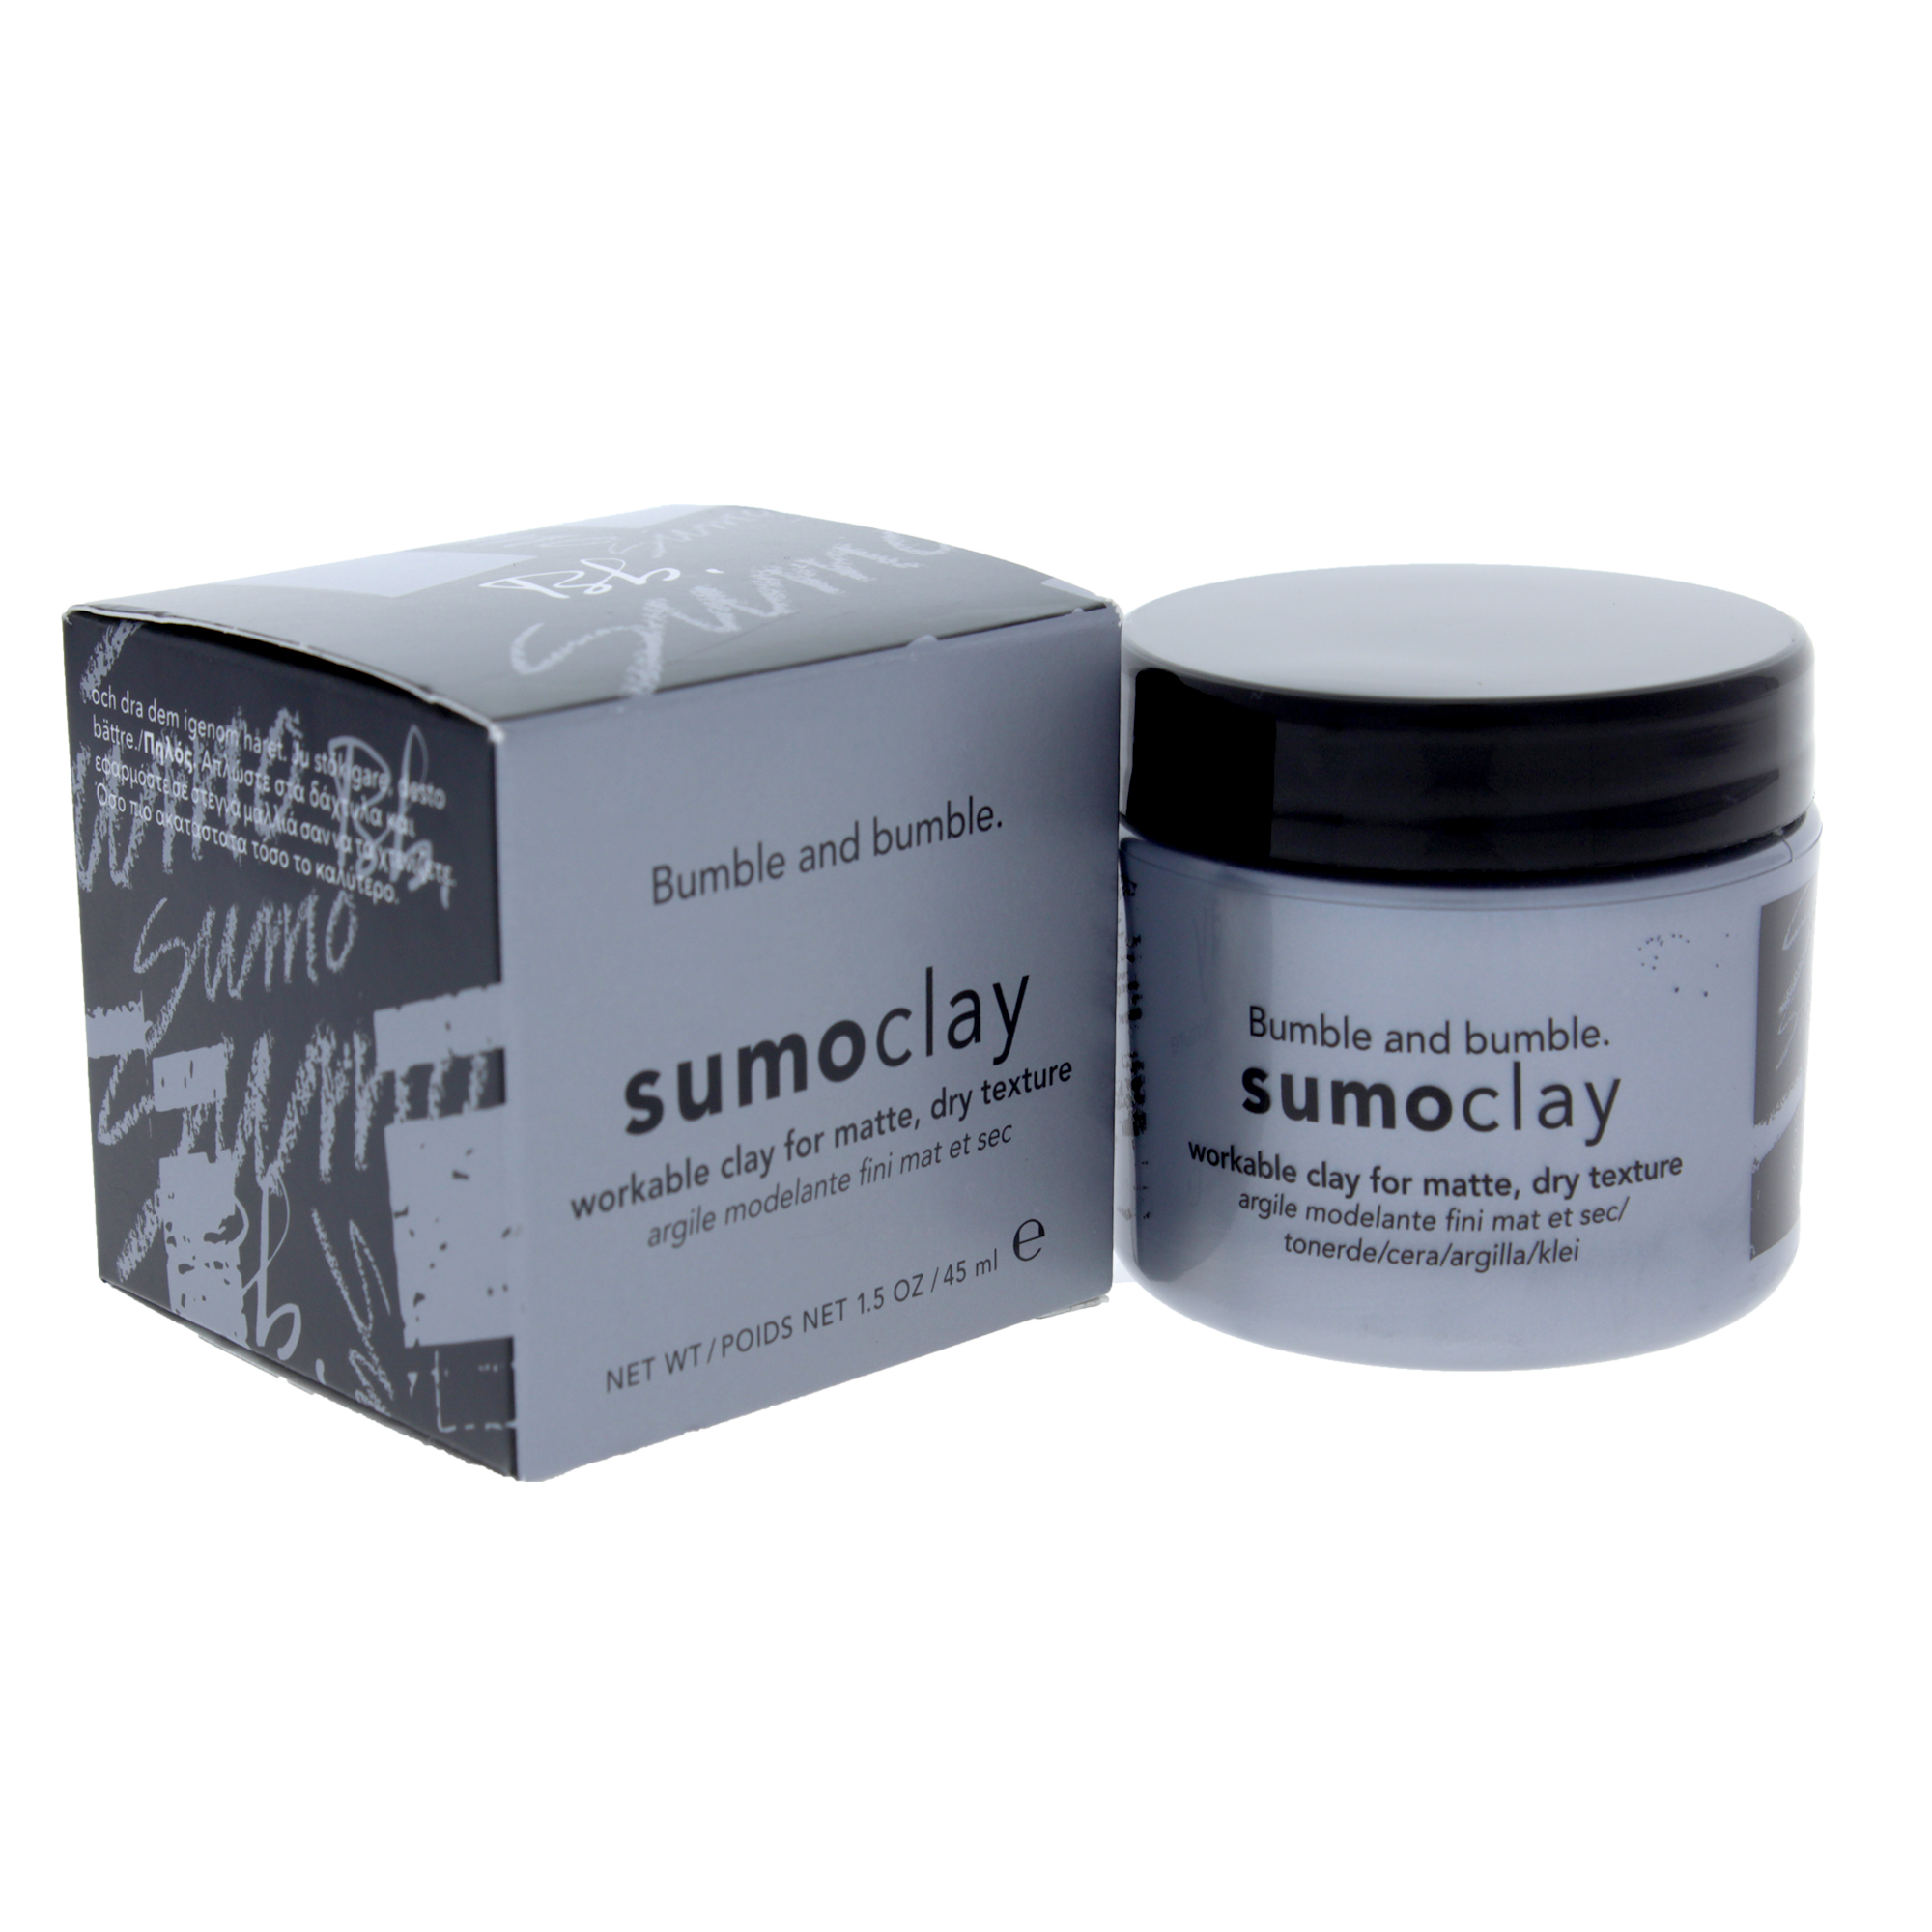 Bumble and Bumble Sumoclay Workable Clay for Matte Dry Texture for Unisex, 1.5 Ounce